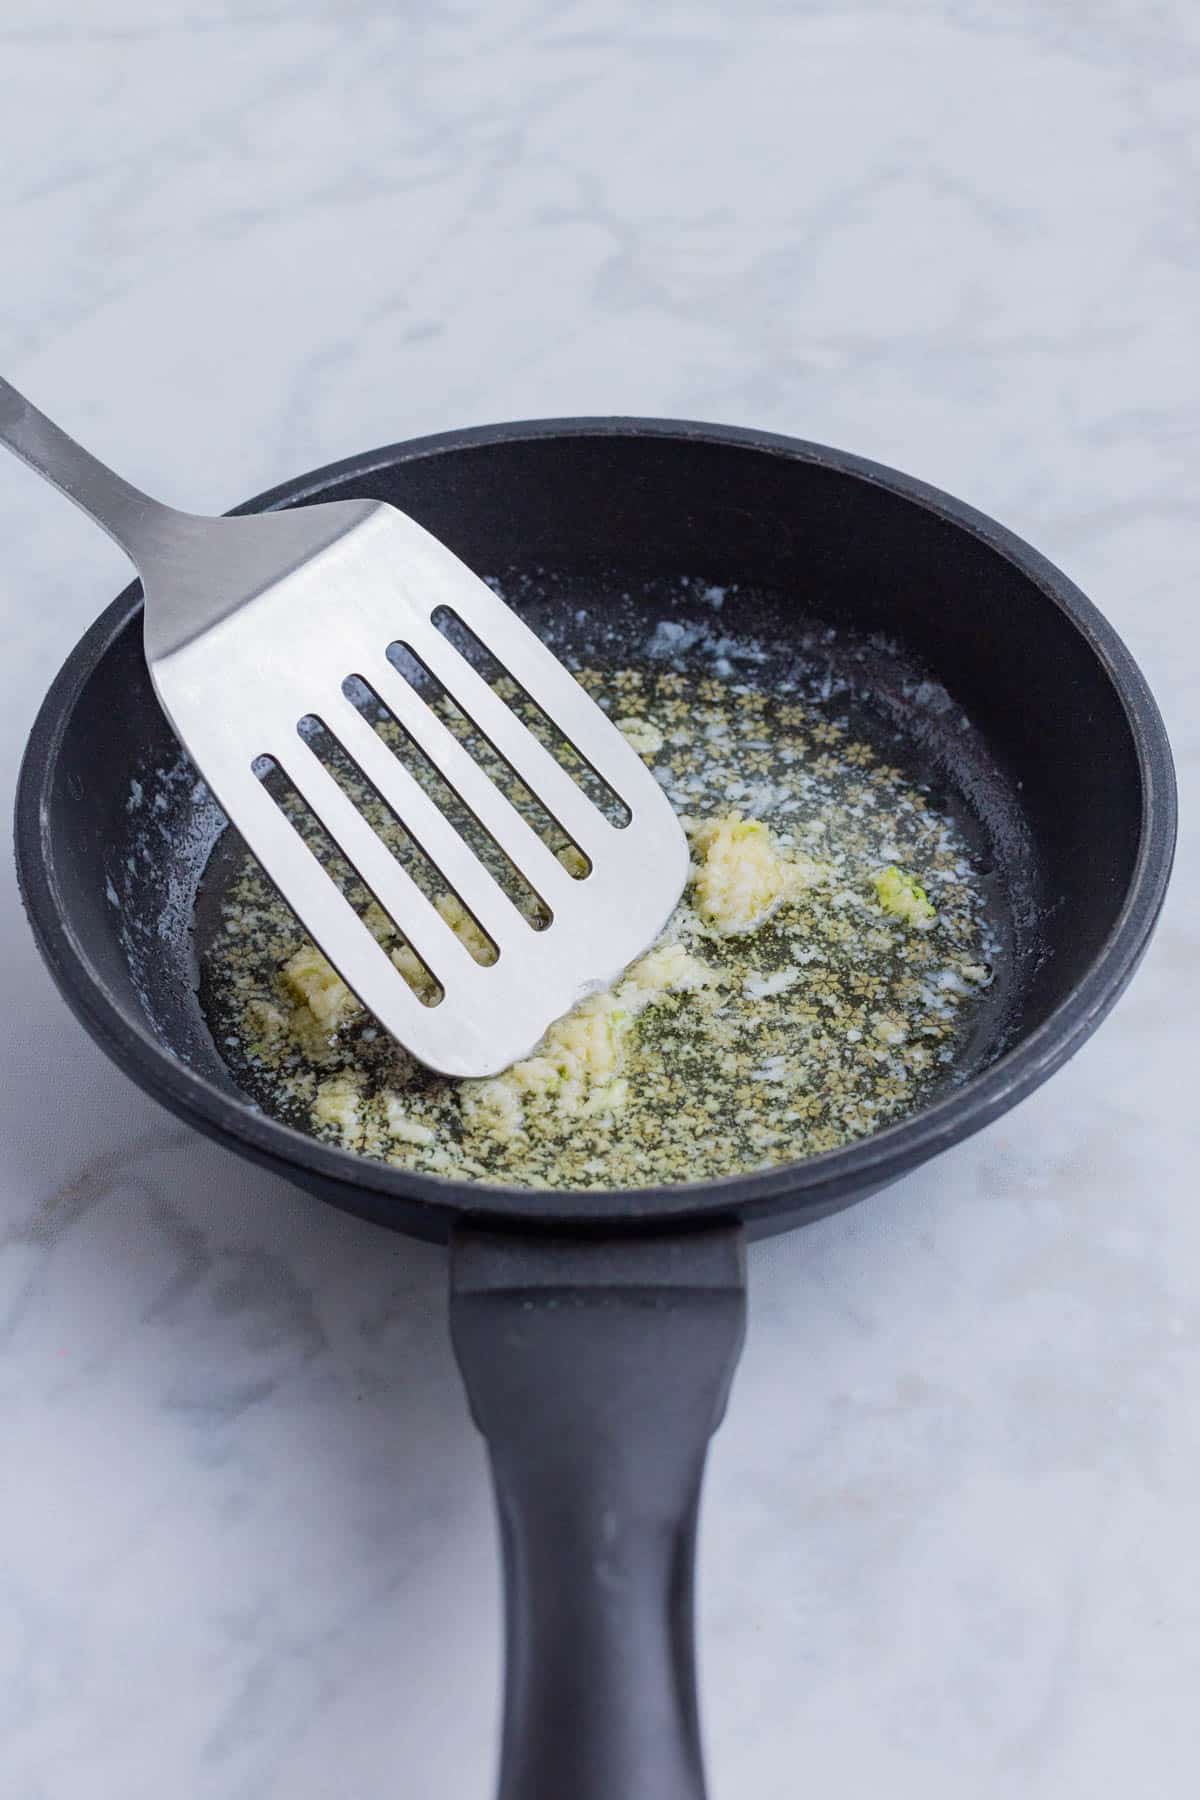 Garlic and butter are cooked together in a skillet.